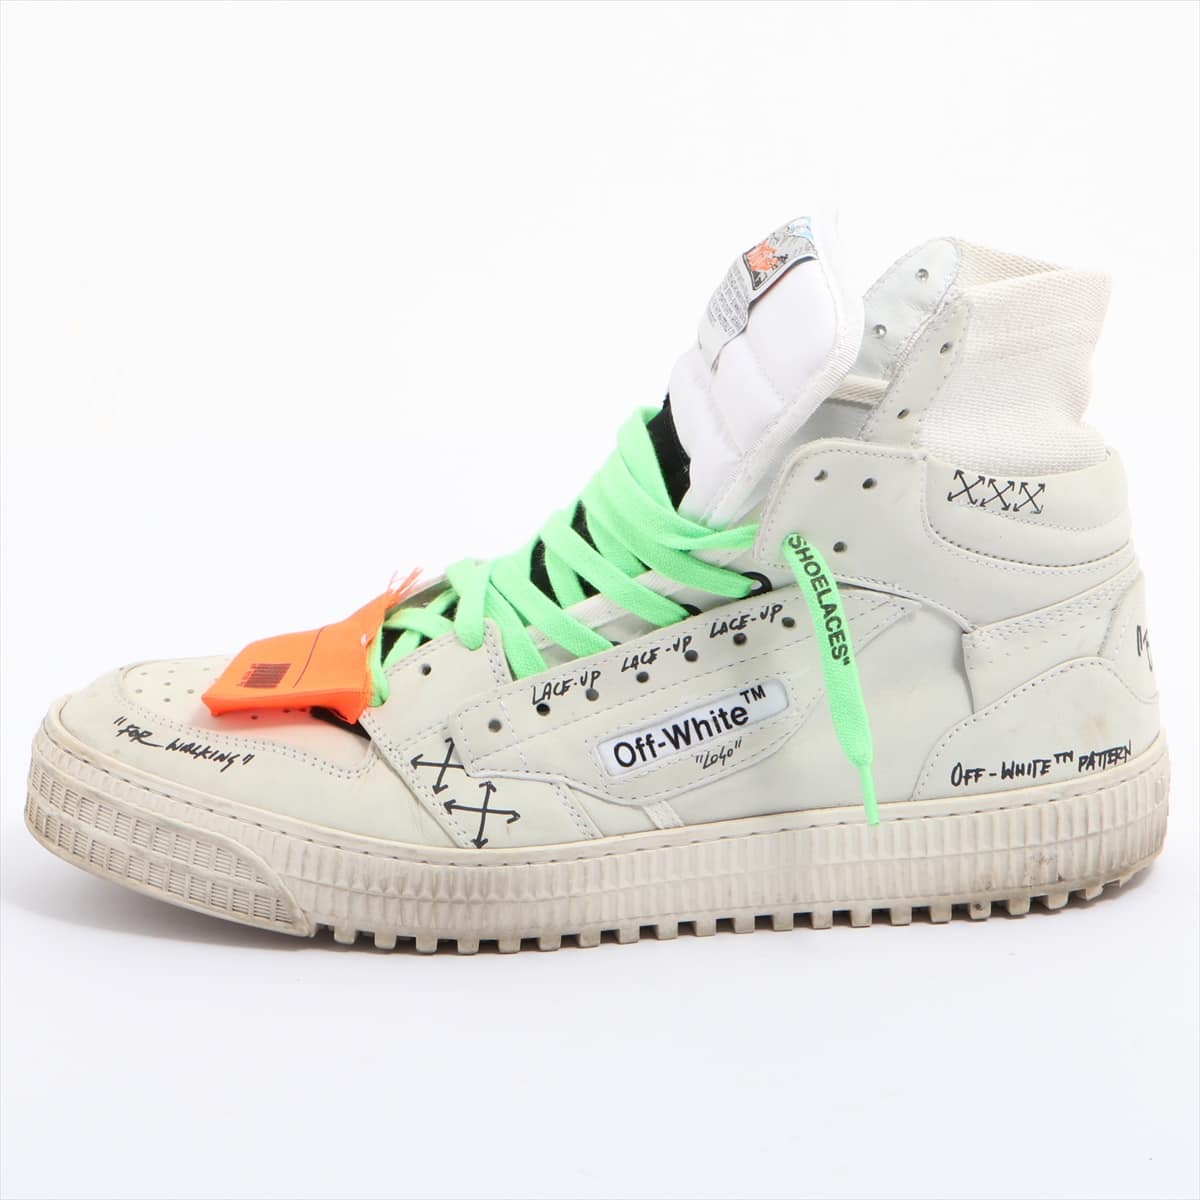 Off-White Leather High-top Sneakers 43 Men's White court classic